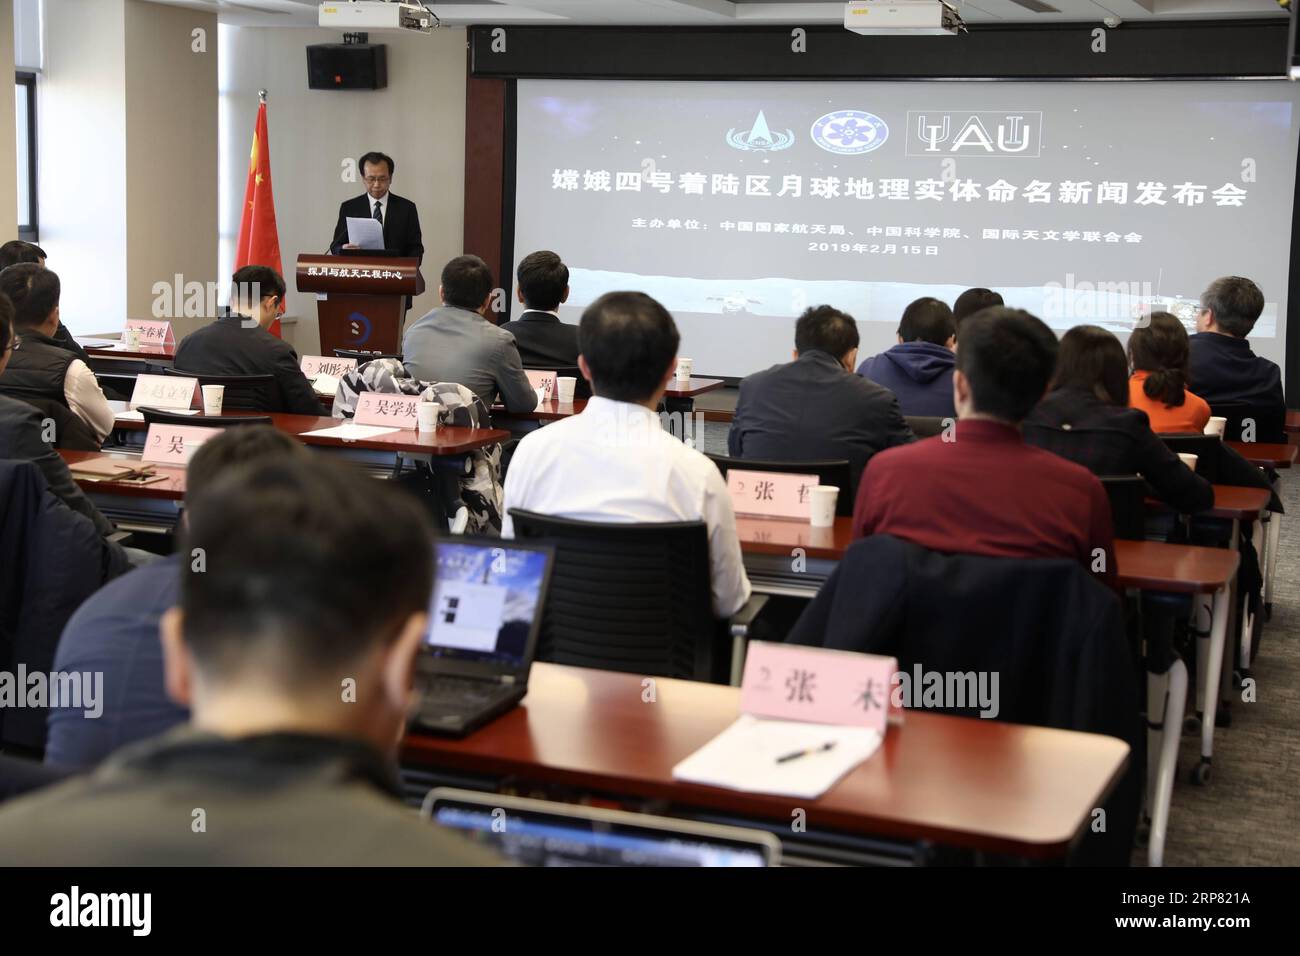 (190215) -- BEIJING, Feb. 15, 2019 (Xinhua) -- Liu Jizhong, director of the China Lunar Exploration and Space Engineering Center of the China National Space Administration (CNSA), is seen at a joint press conference held in Beijing on Feb. 15, 2019. The landing site of China s Chang e-4 lunar probe has been named Statio Tianhe after the spacecraft made the first-ever soft landing on the far side of the moon last month. Together with three nearby impact craters and one hill, the name was approved by the International Astronomical Union (IAU), Liu said at a joint press conference held in Beijing Stock Photo